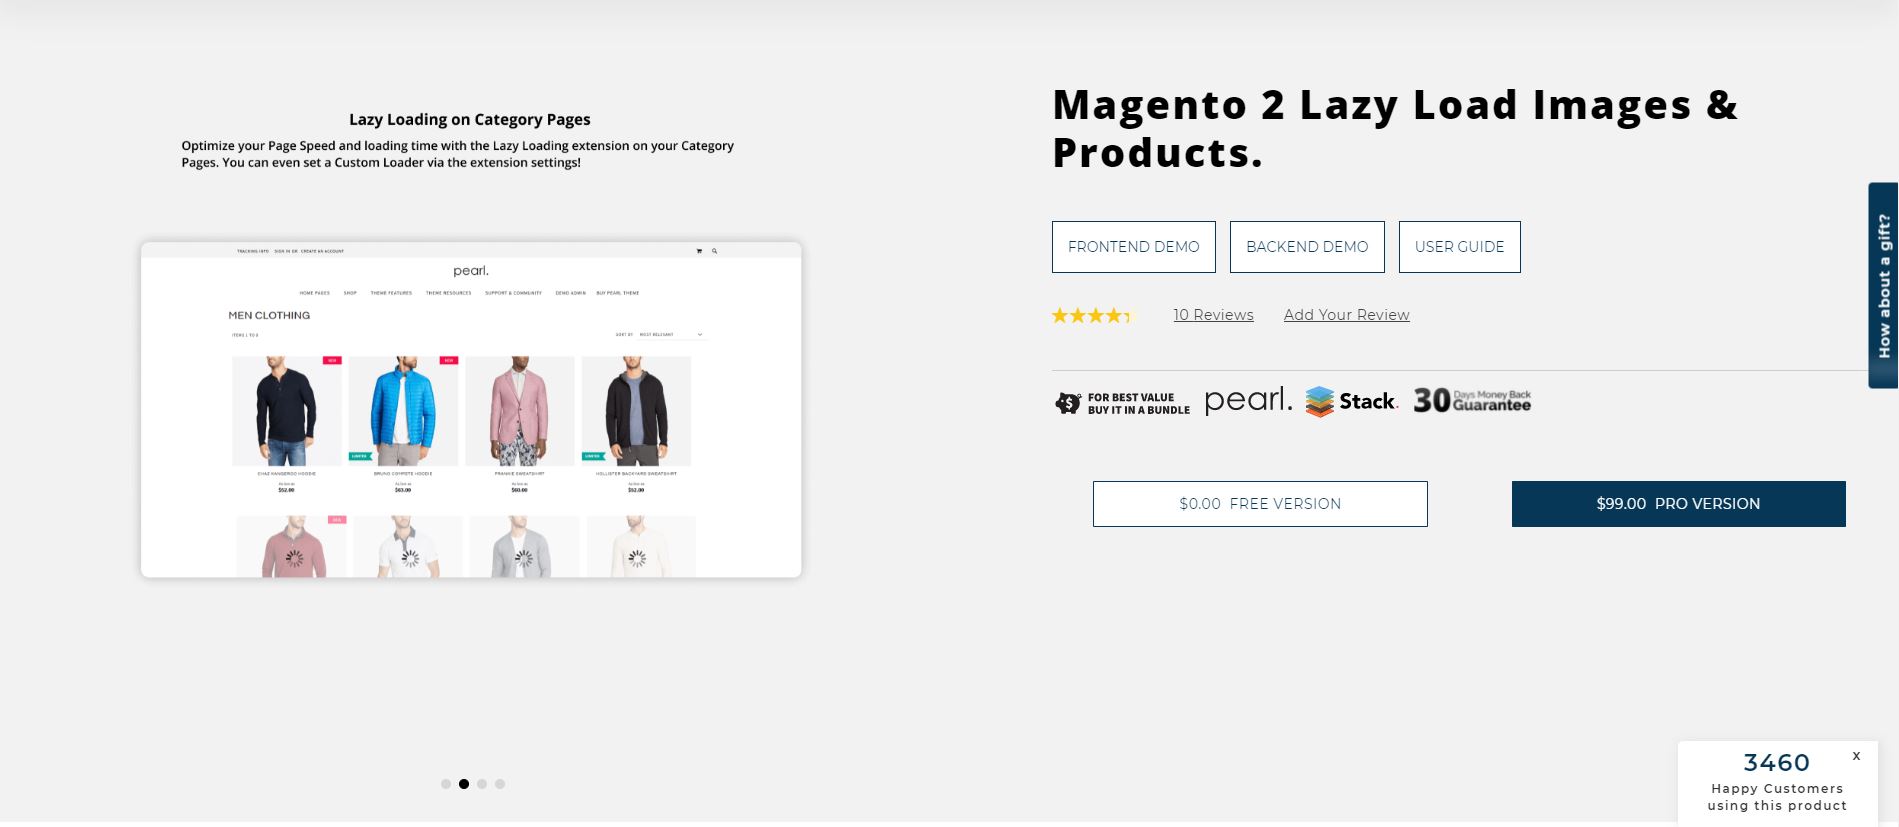 Magento image extension